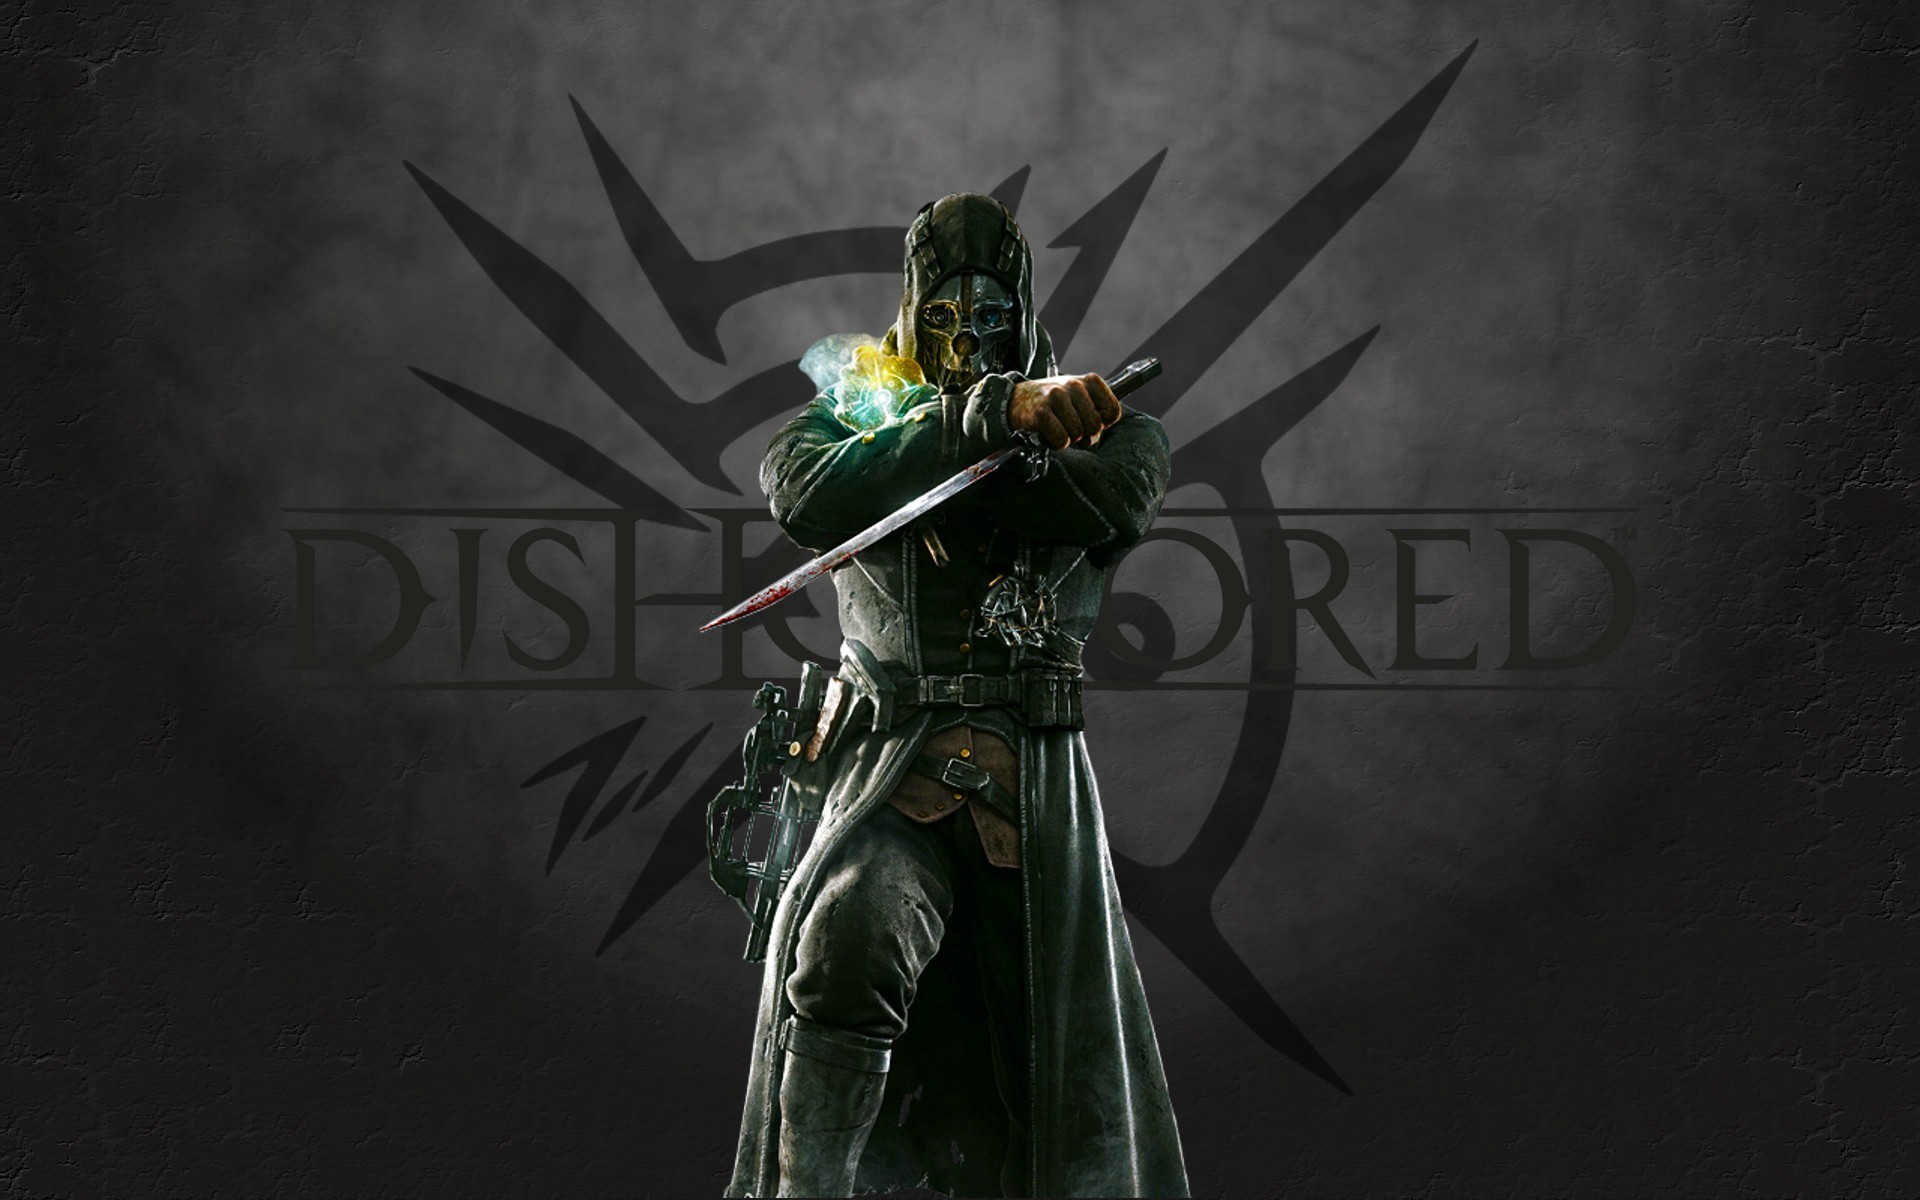 1920x1200 I made a dishonored wallpaper for you!